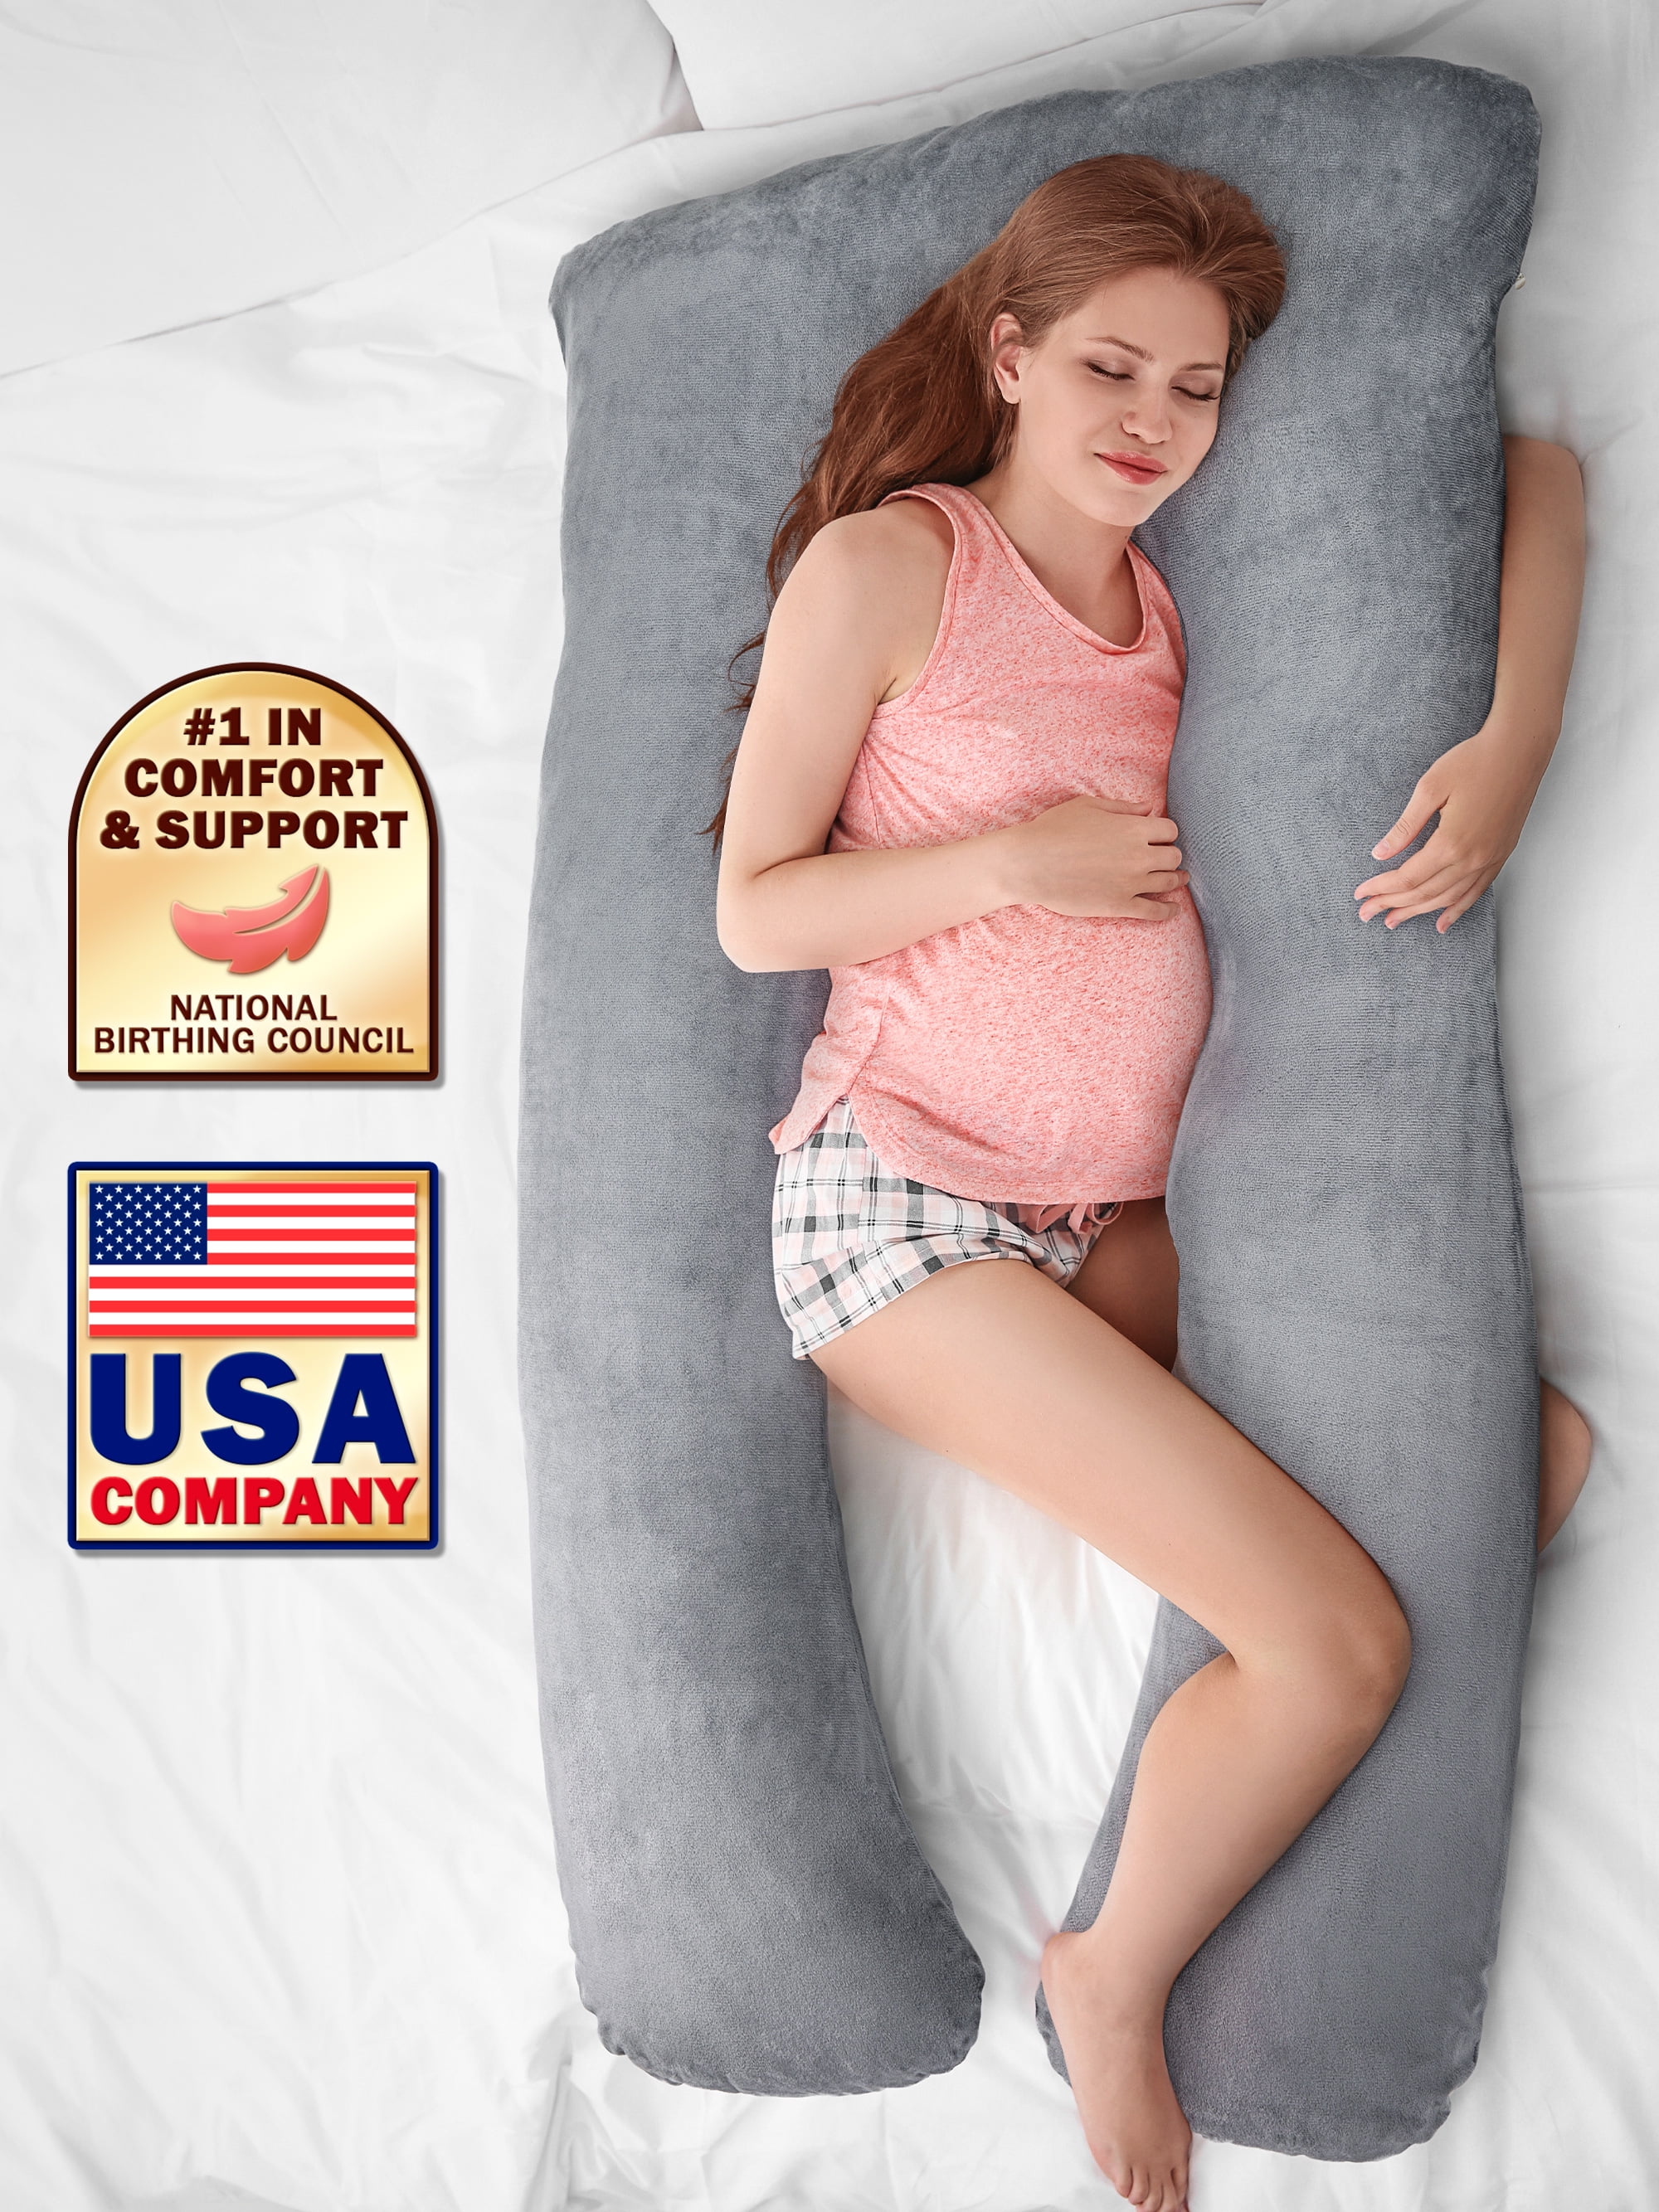 AngQi Full Body Pregnancy Pillow, 55-inch U Shaped Maternity Pillow for Back  Pain Relief and Pregnant Women, with Body Pillow Jersey Cover, Gray 